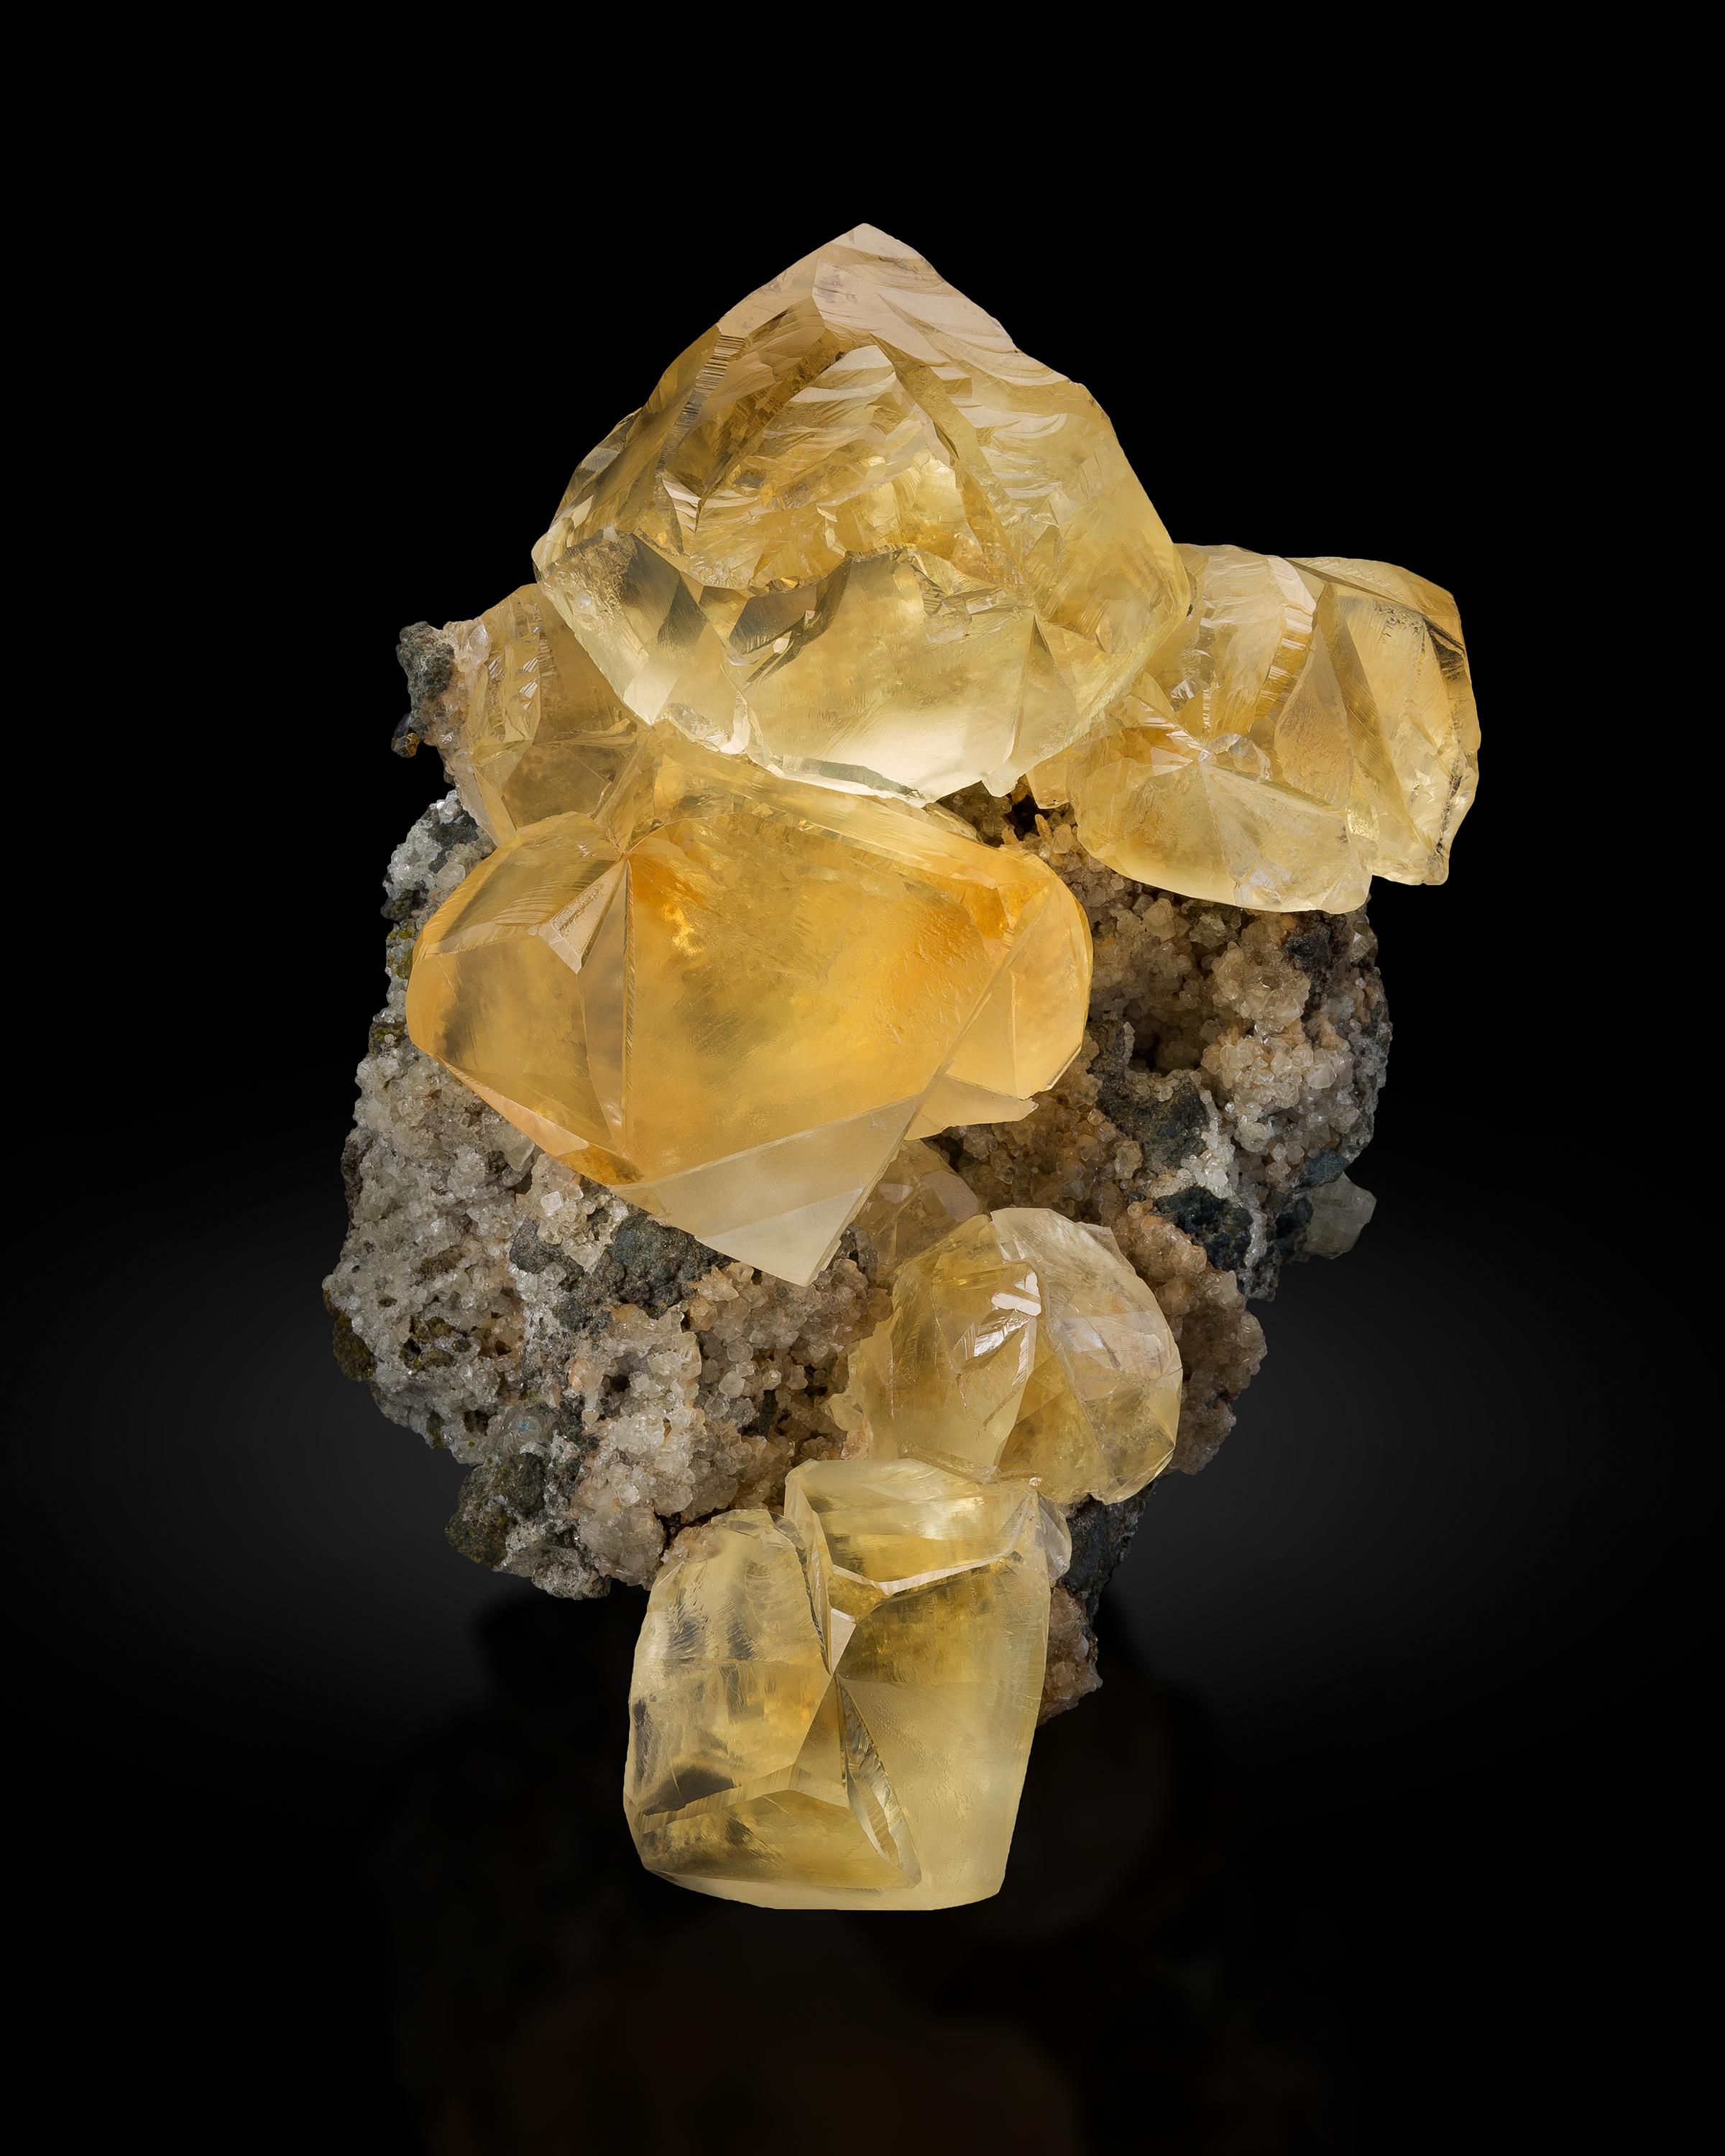 Although abundant, the many shapes, colors, and associations of calcite make for a seemingly infinite number of permutations. This allows collectors to have entire suites consisting only of calcite specimens where one is far different from the next.